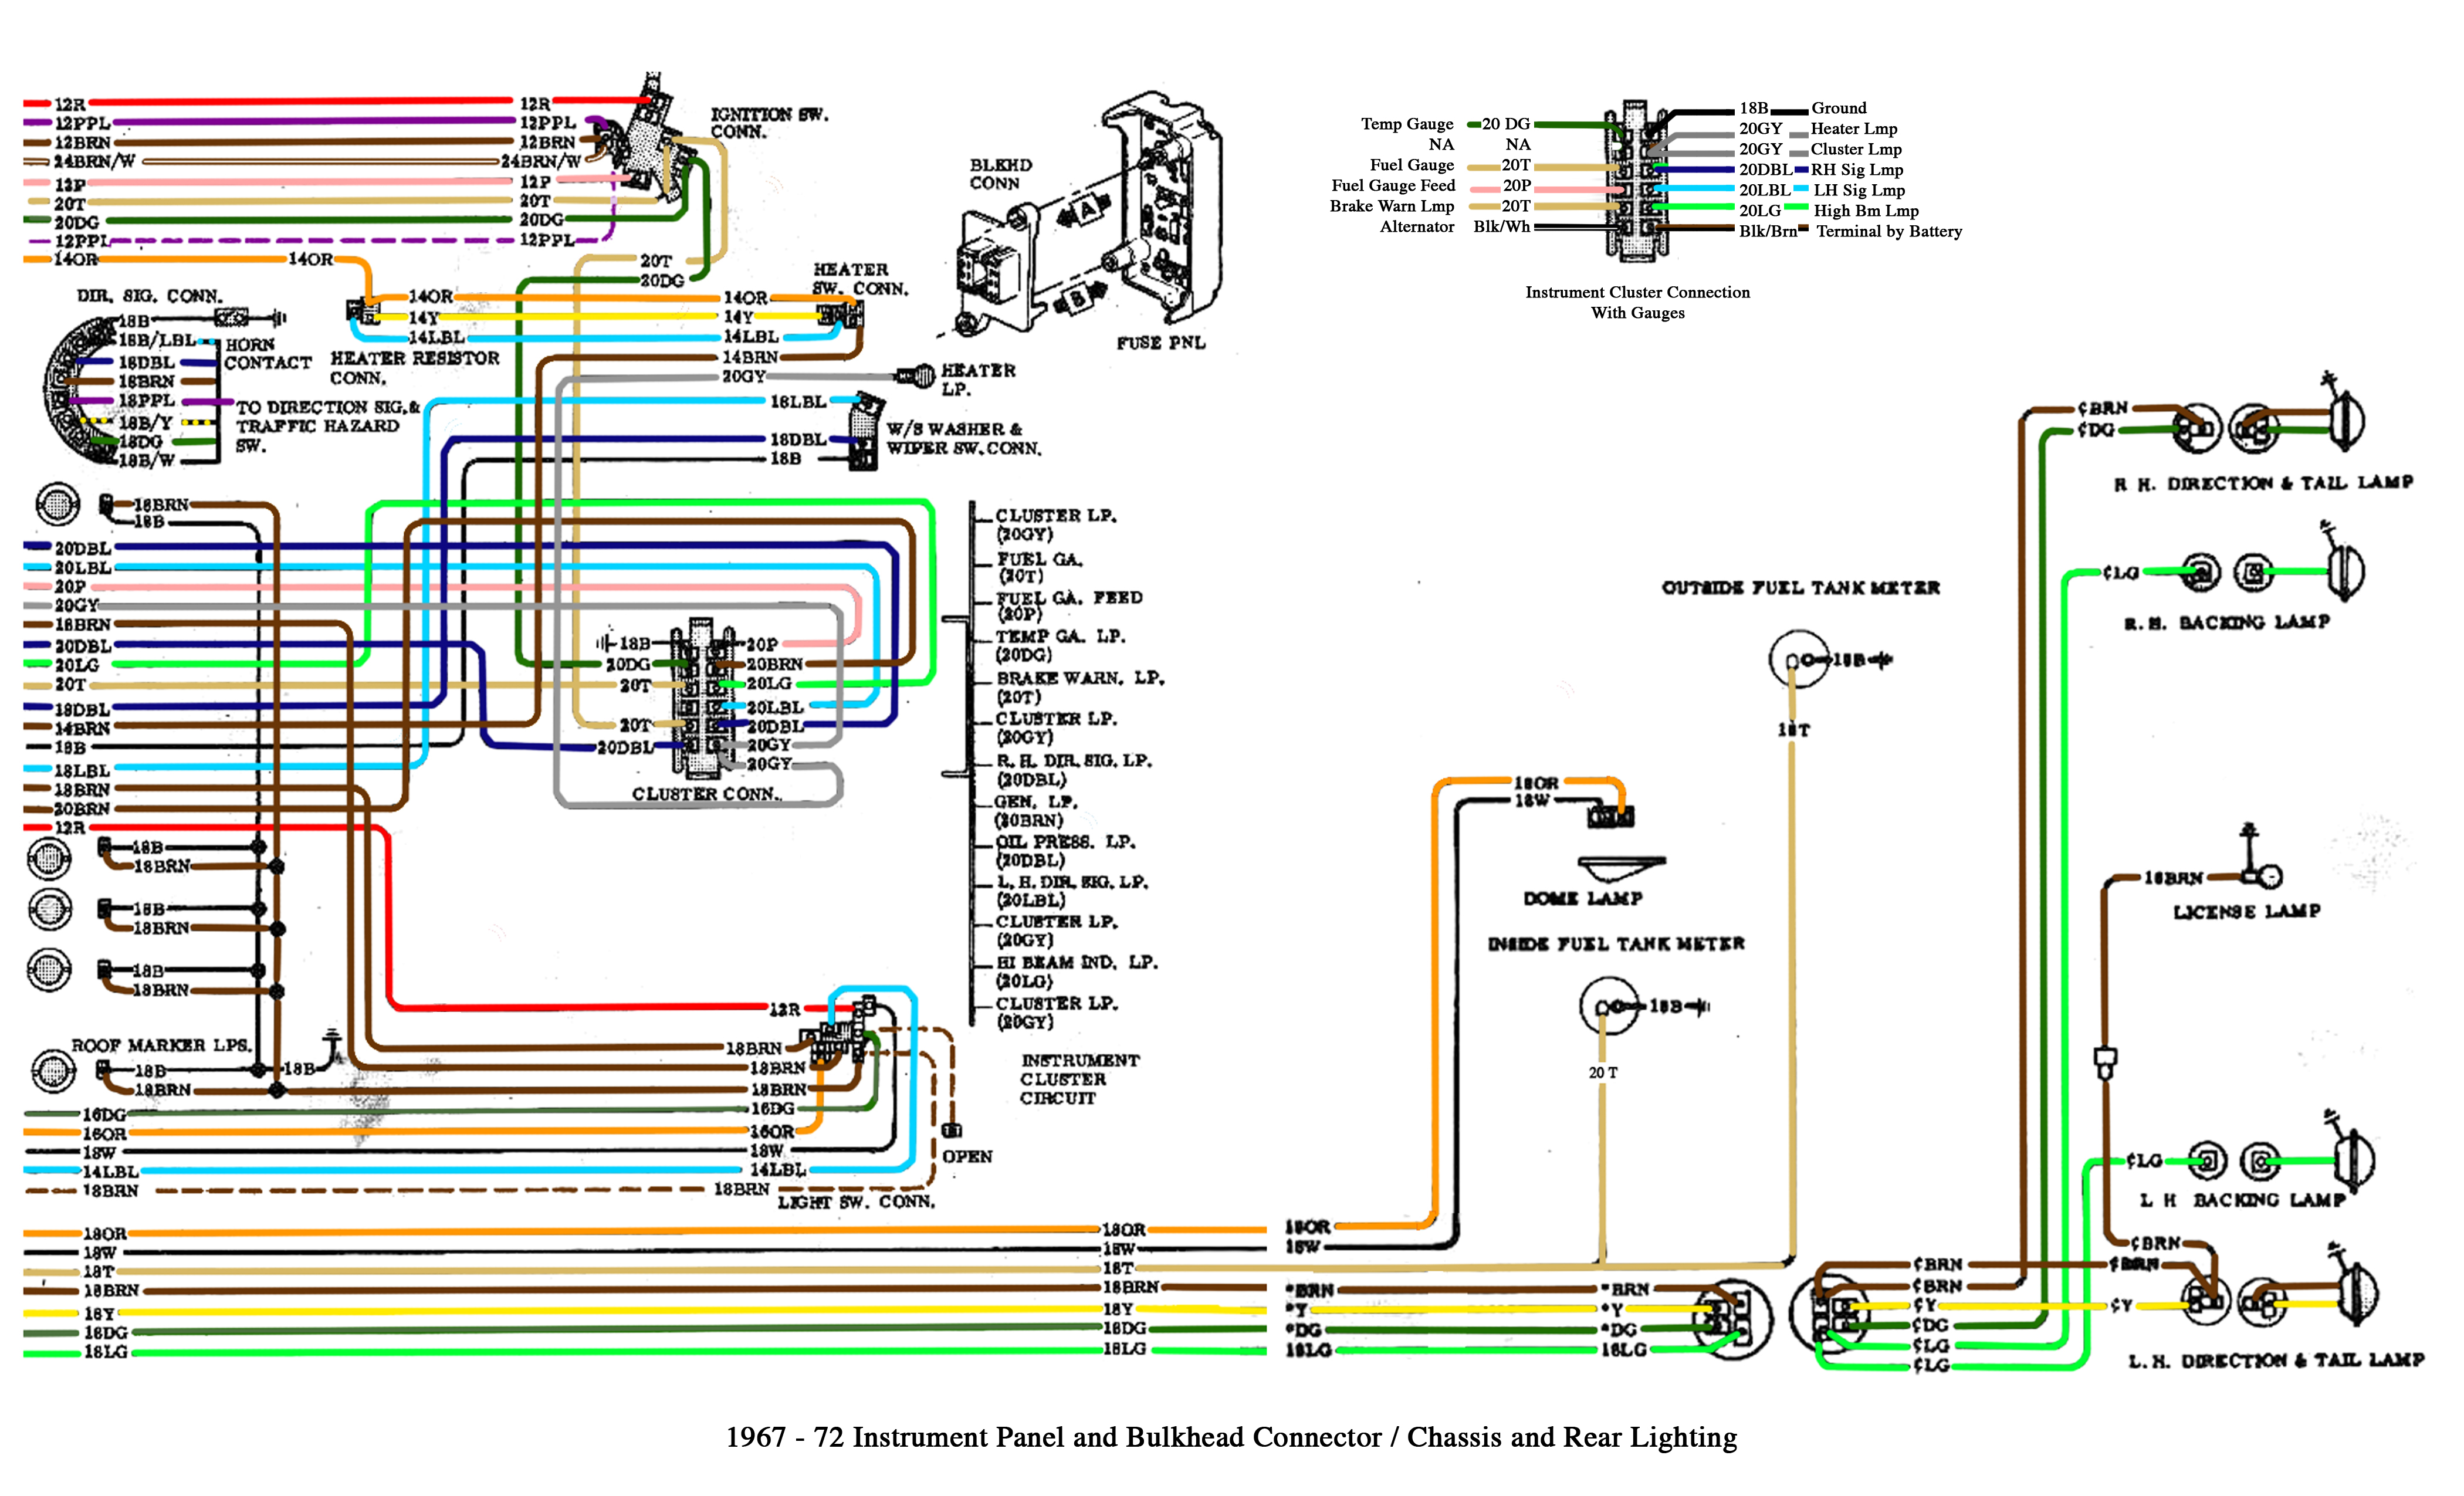 1982 Chevy Truck Wiring Diagram from farm4.staticflickr.com